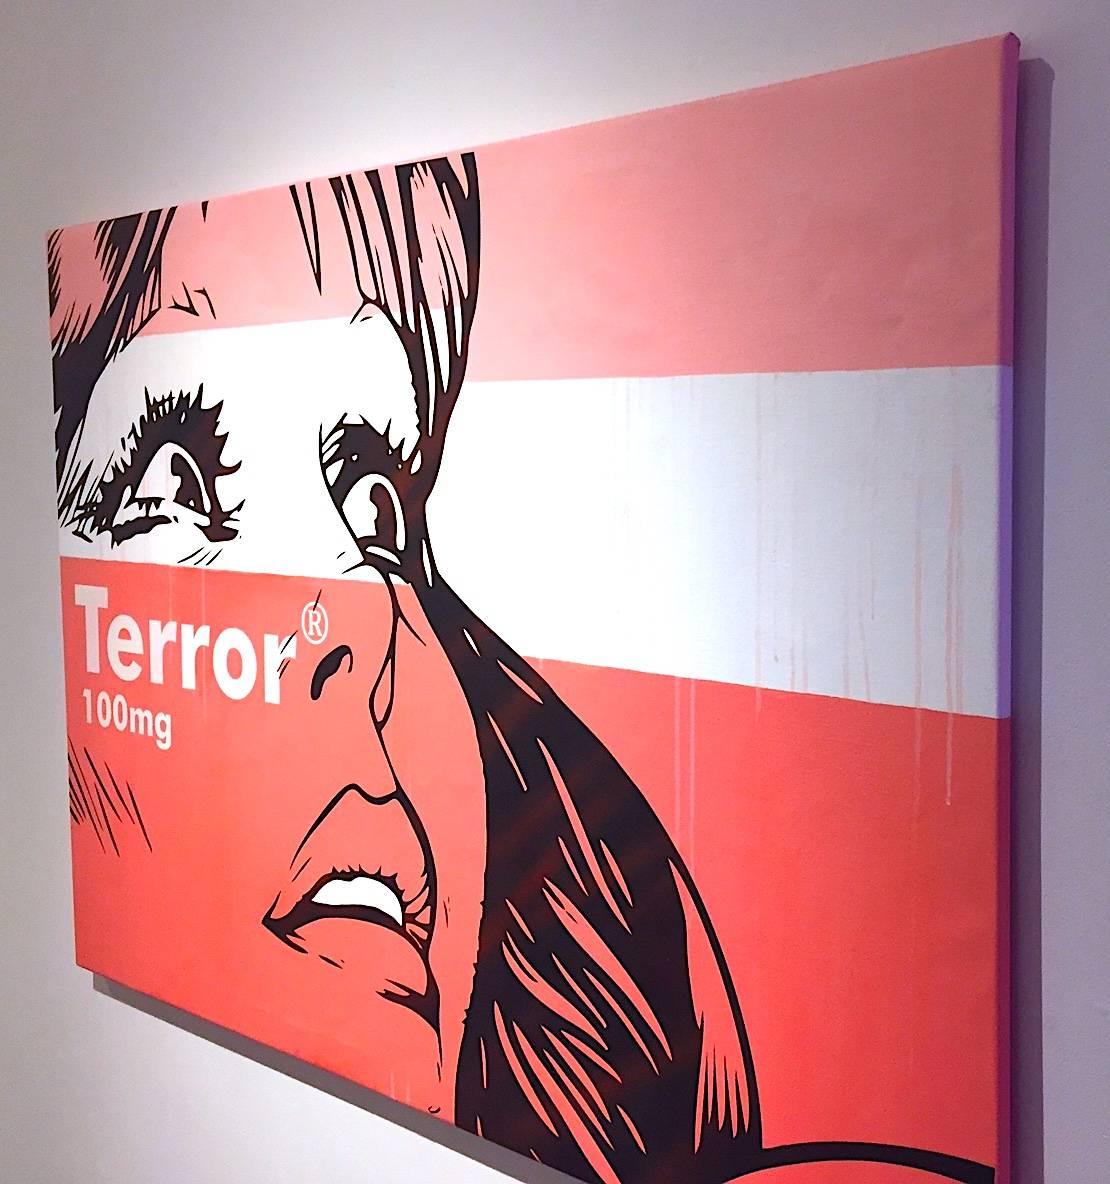 Terror - 100mg - Painting by Ben Frost